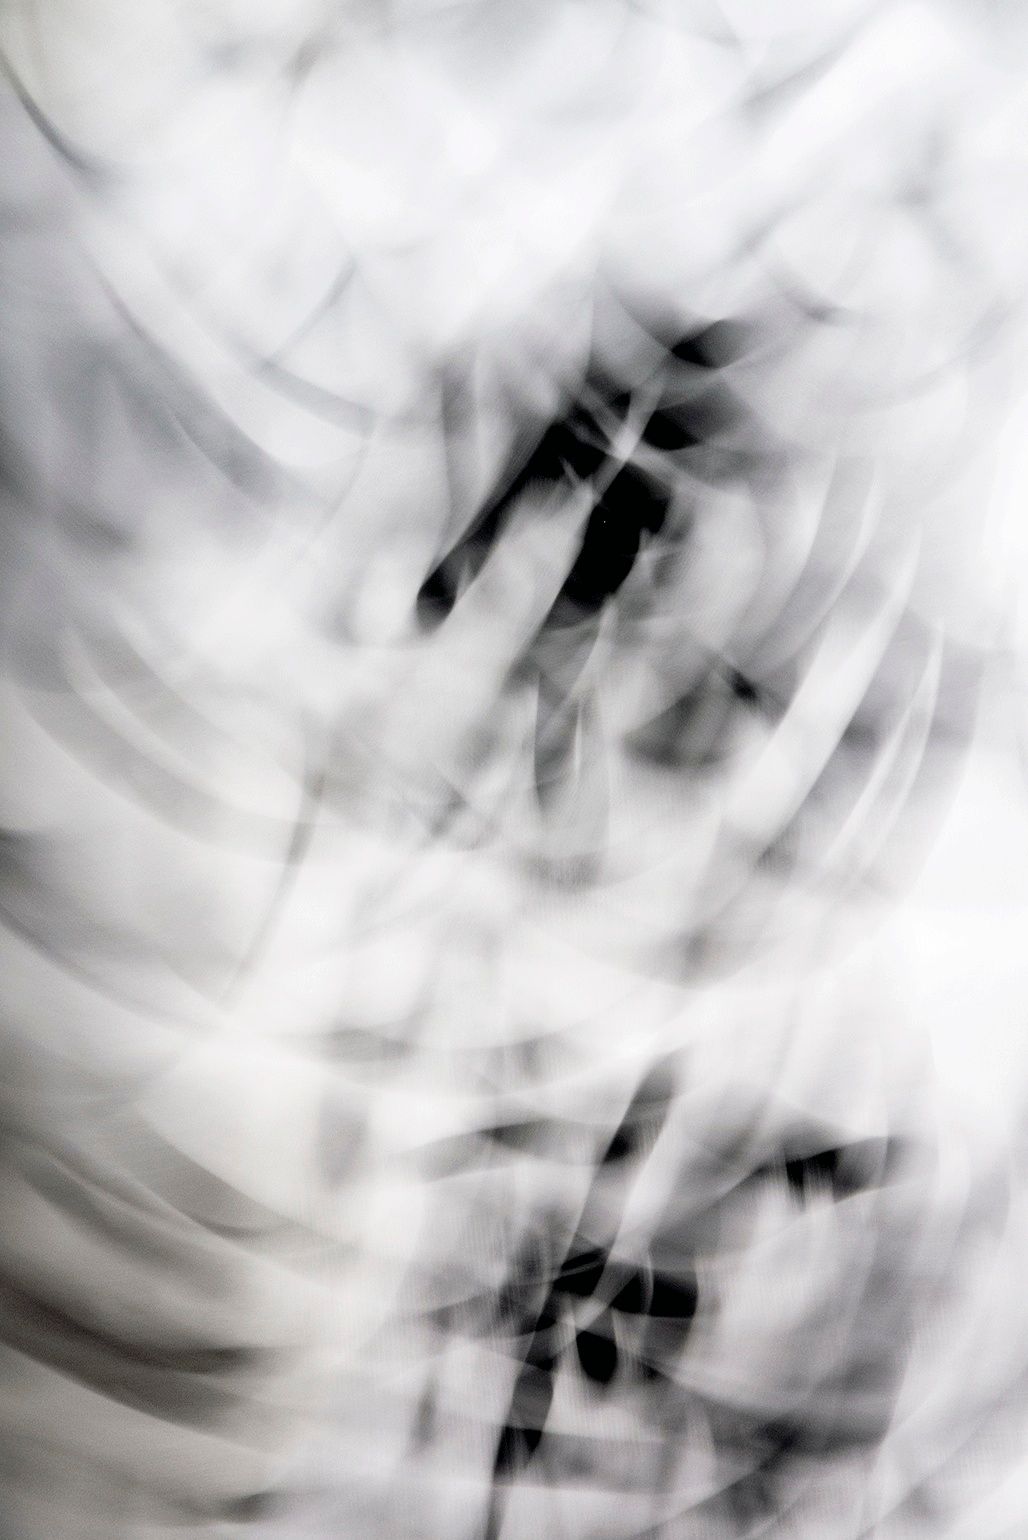 Untitled, 2013, Black and White Abstract Photography, Shirine Gill